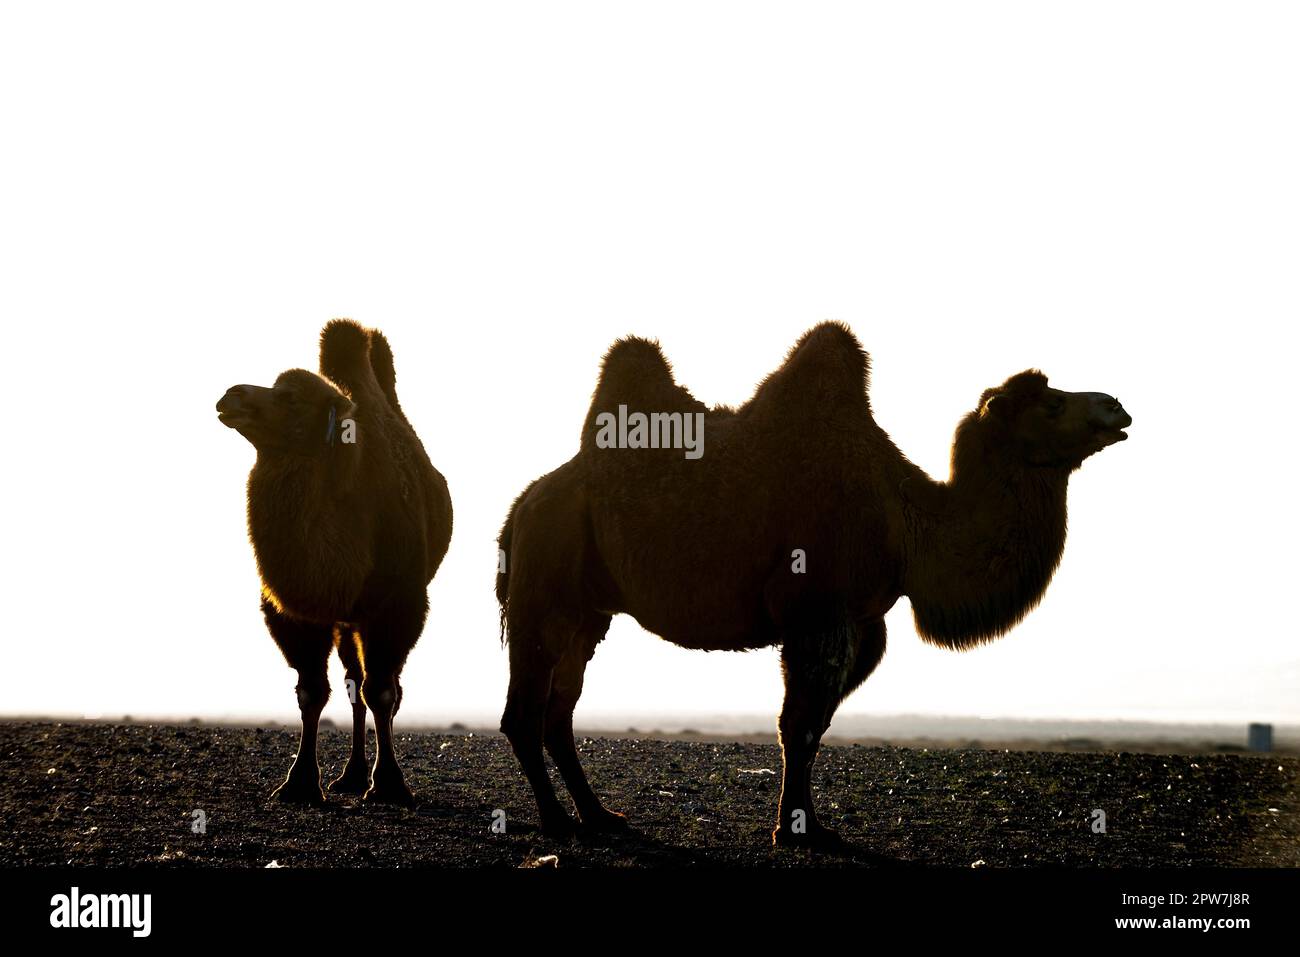 The silhouettes of two camels or Bactrian camels in the heat of the Gobi desert, Mongolia, Central Asia Stock Photo